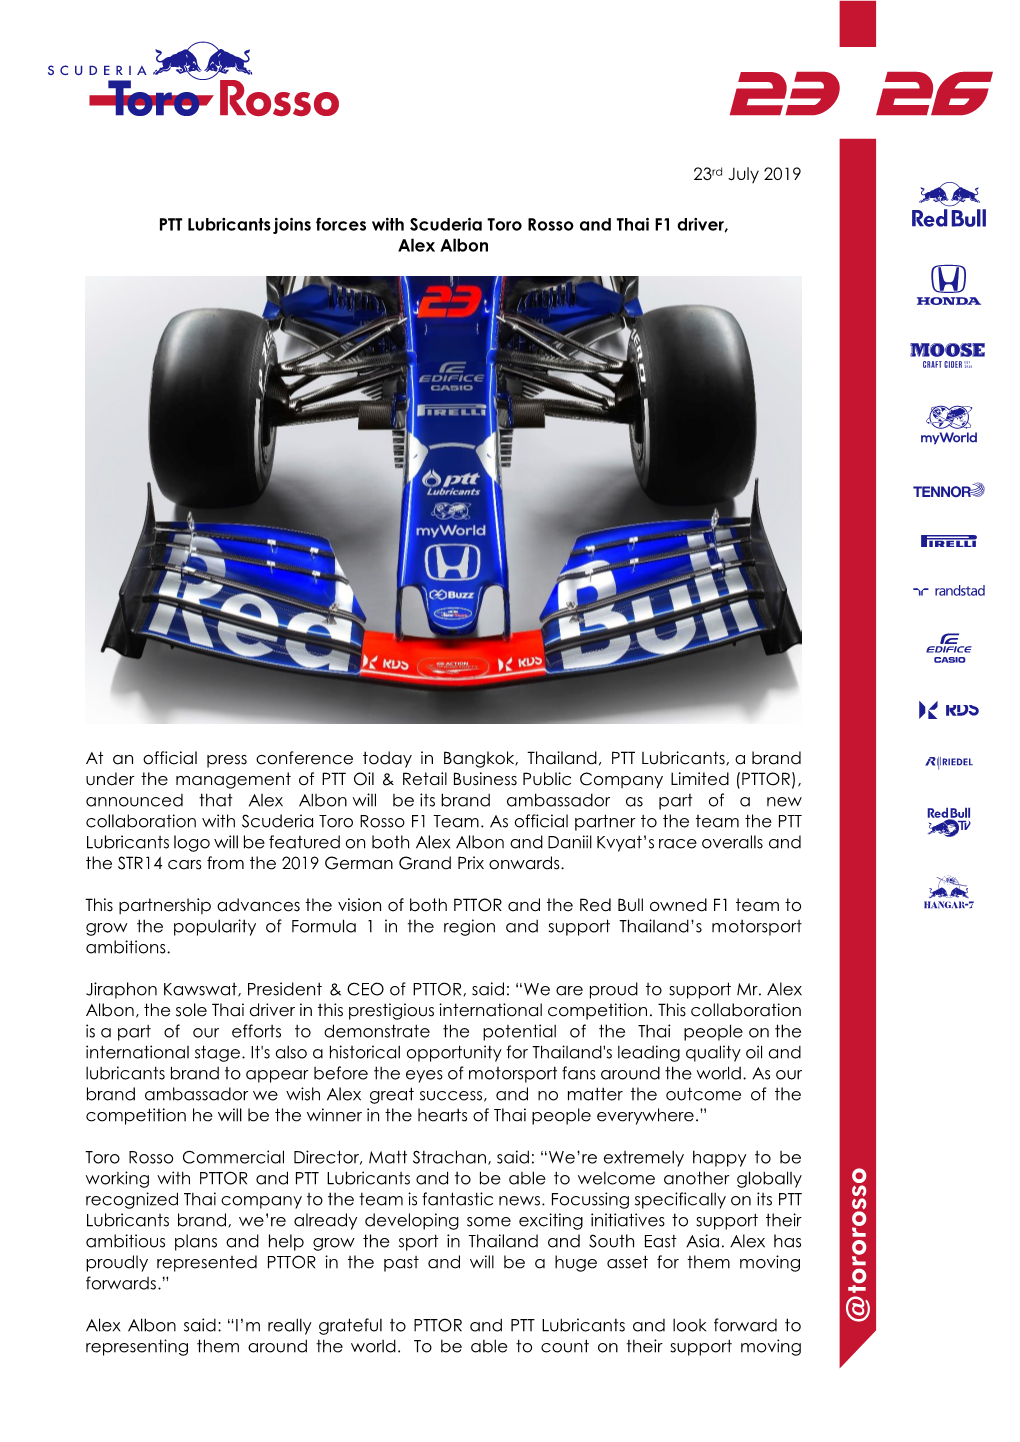 23Rd July 2019 PTT Lubricants Joins Forces with Scuderia Toro Rosso